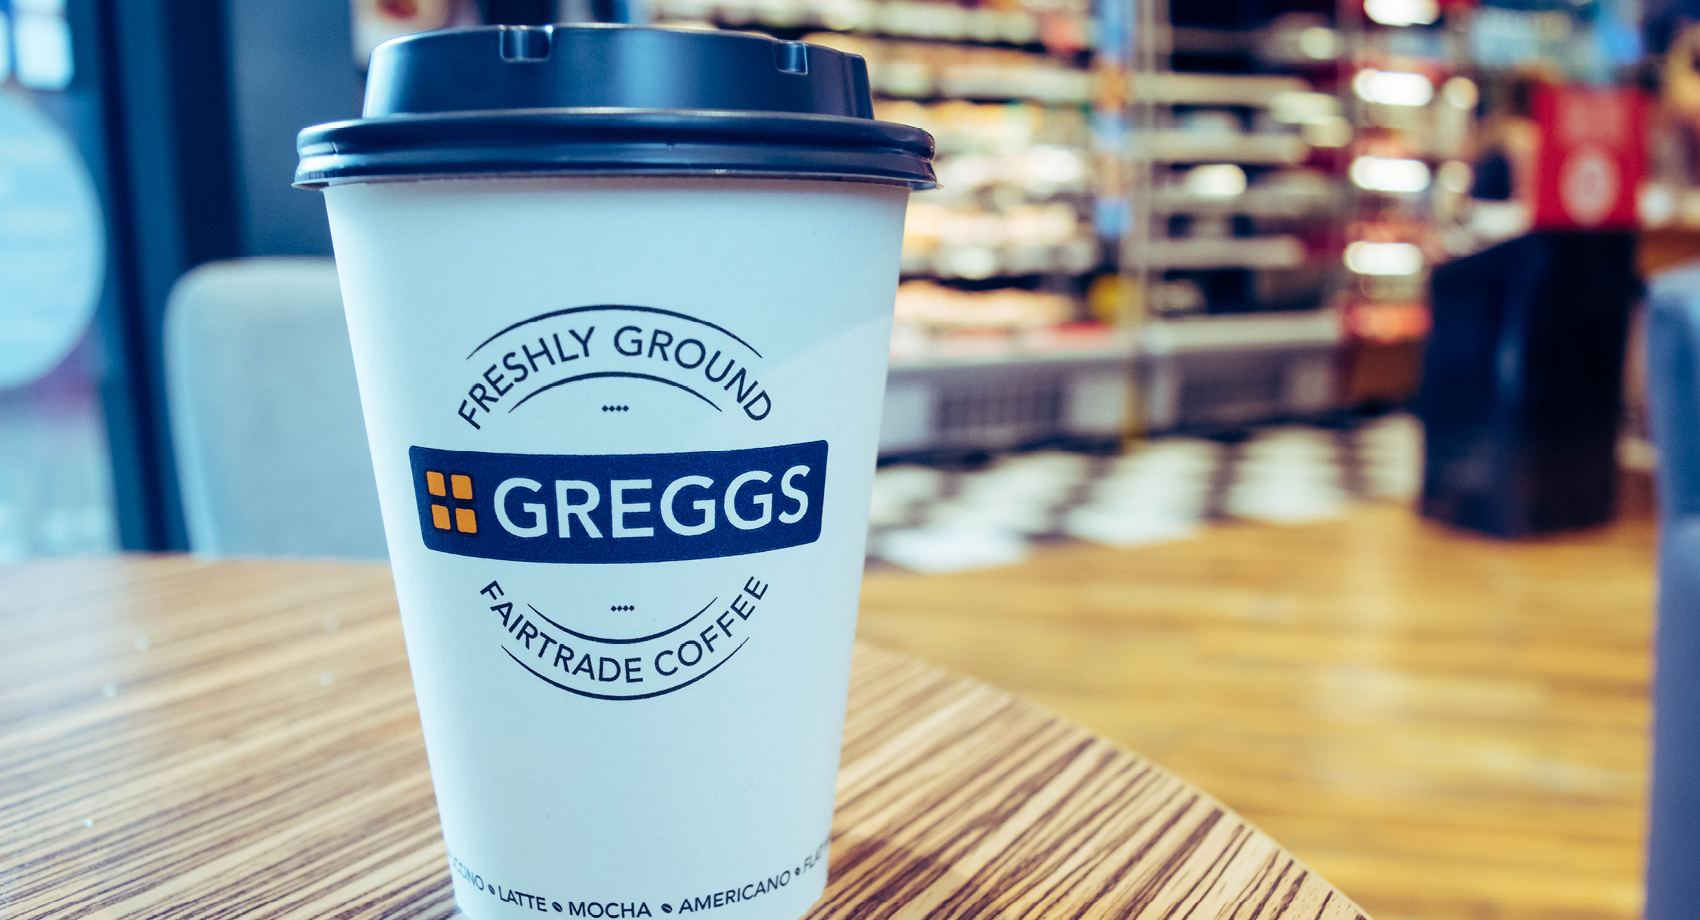 Greggs coffee cup on table